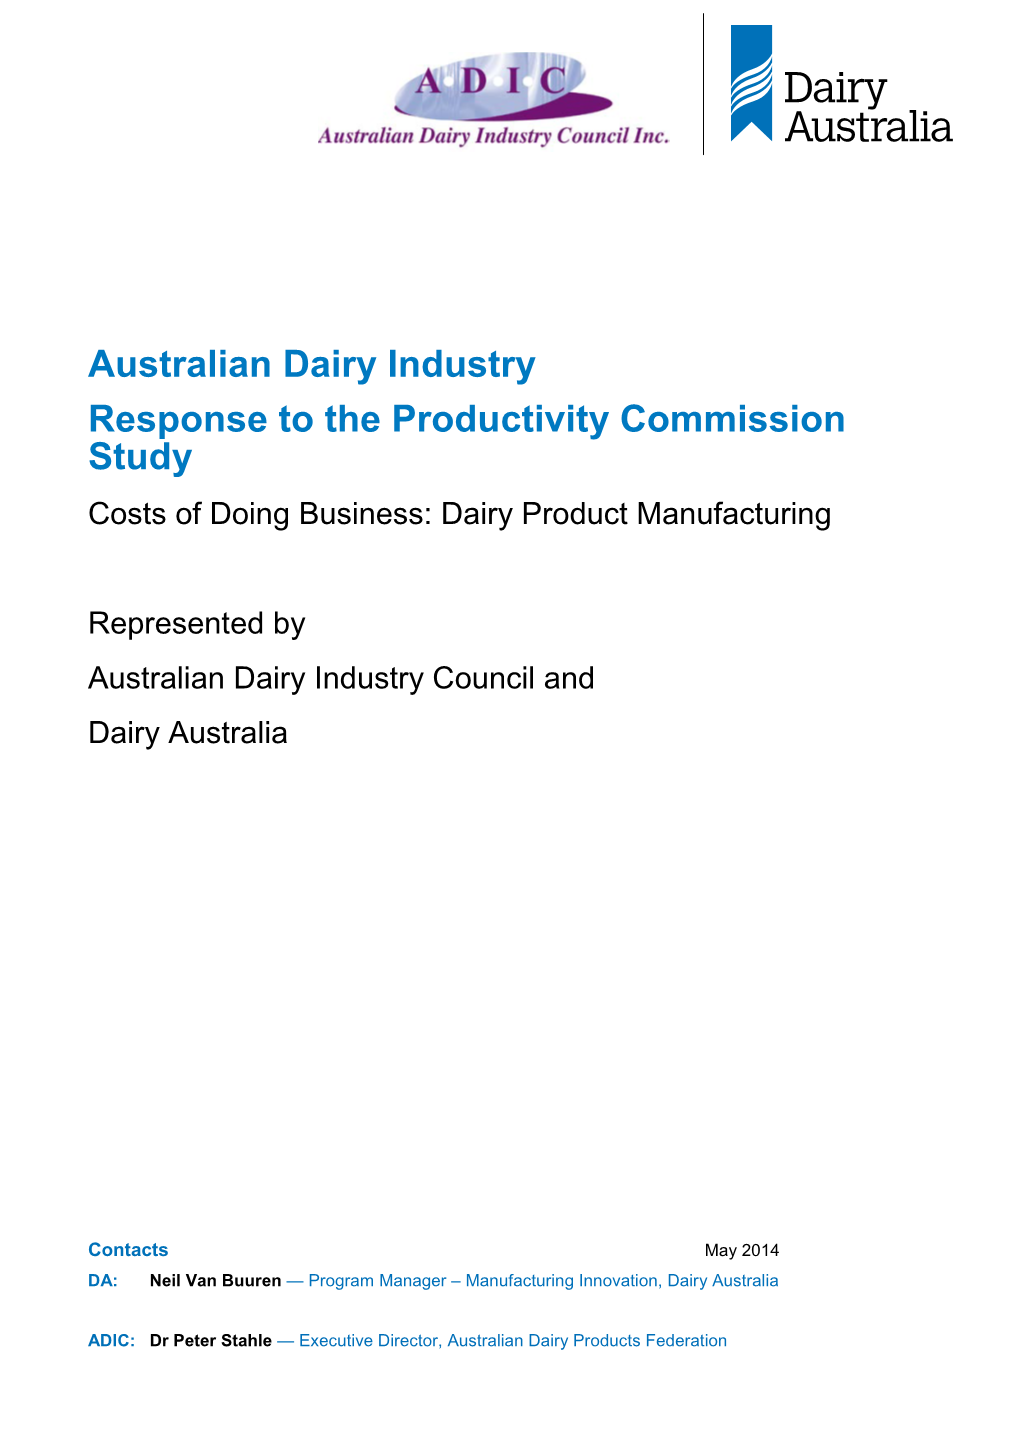 Australian Dairy Industry Council and Dairy Australia